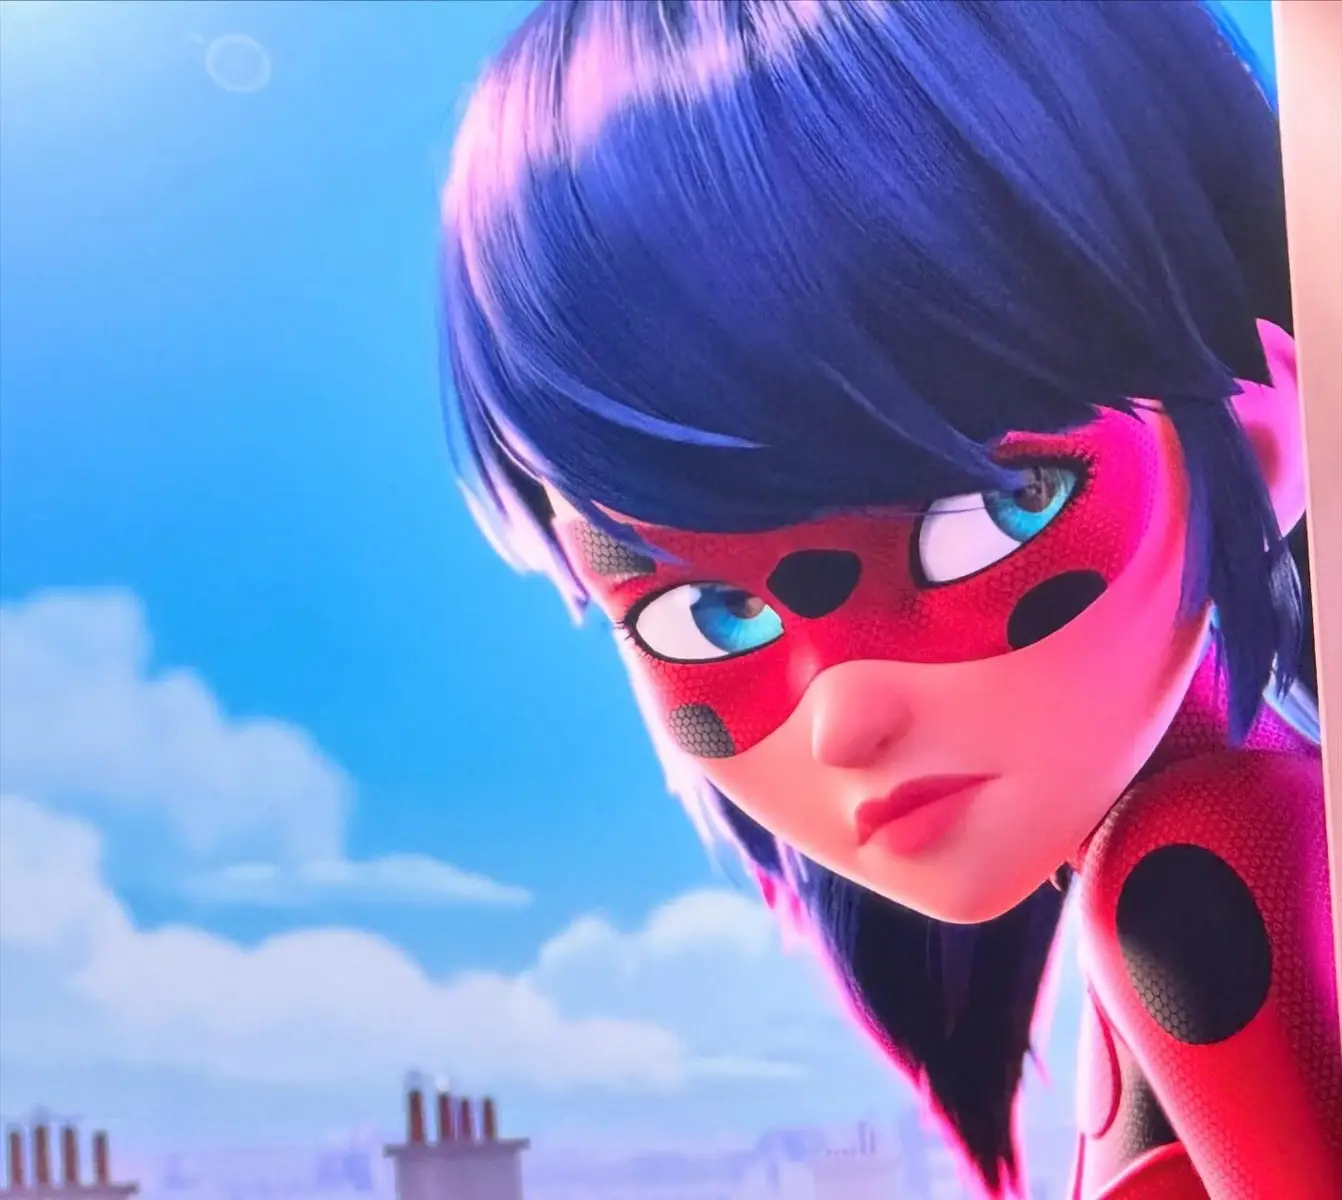 A first look of Miraculous Season 6 😍 What do you think about it? 🤩 #miraculous #miraculousladybug #ladybug #mlbs6 #firstlook 